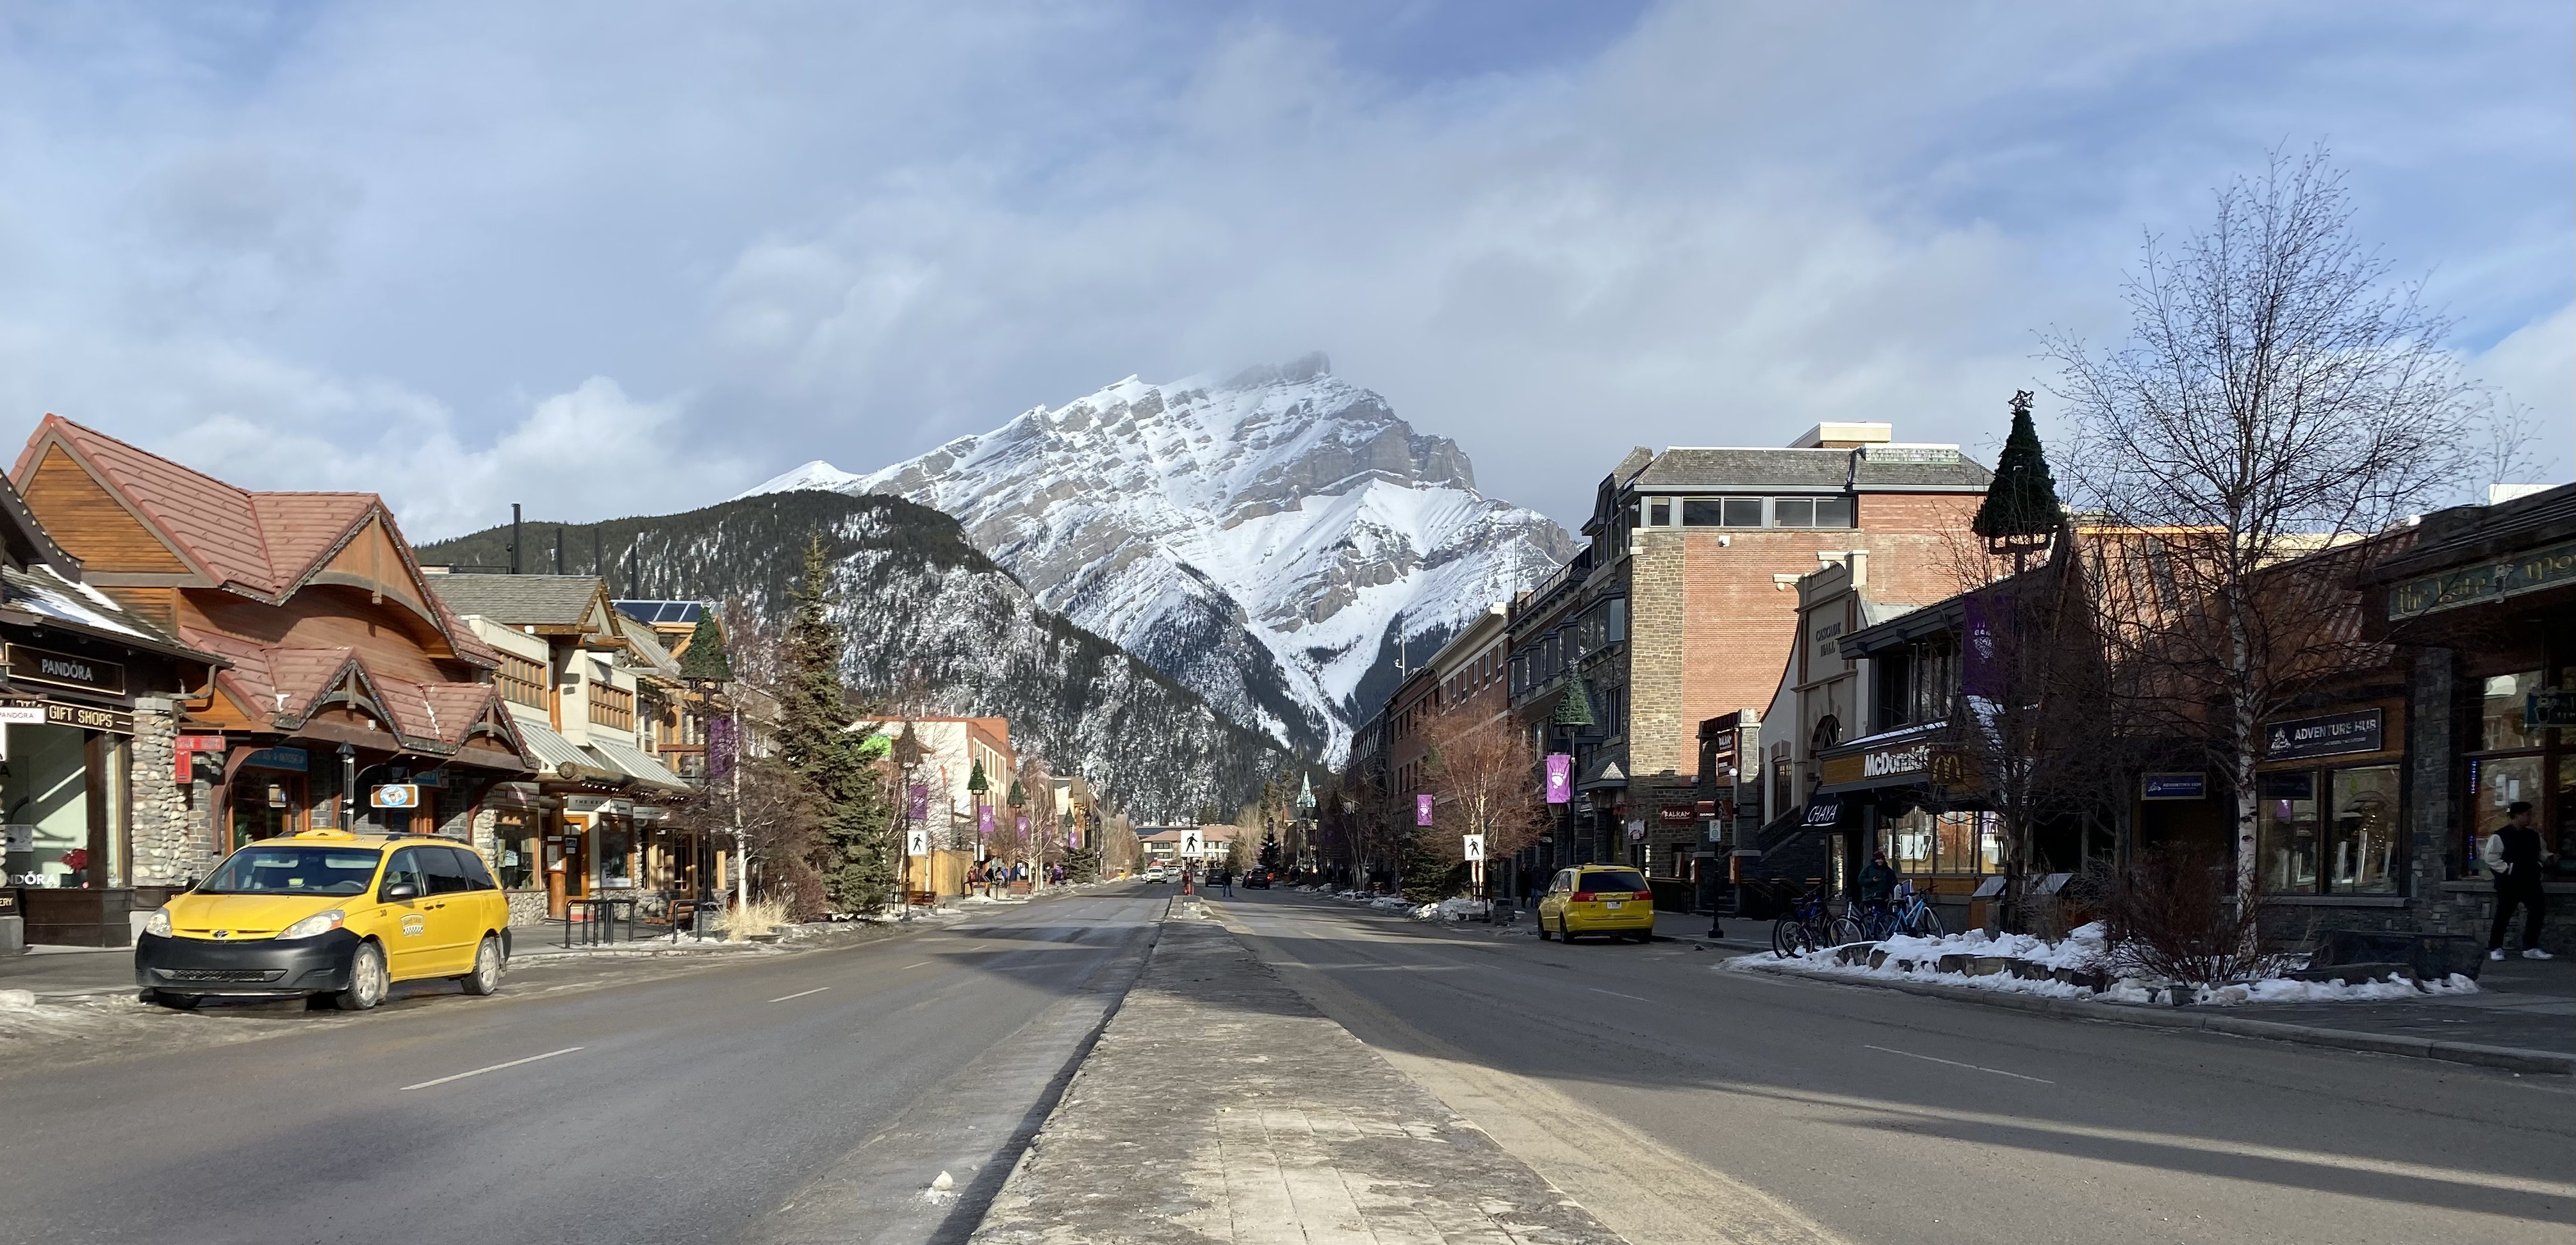 Banff council and Parks Canada at odds over future of patios on town’s main road